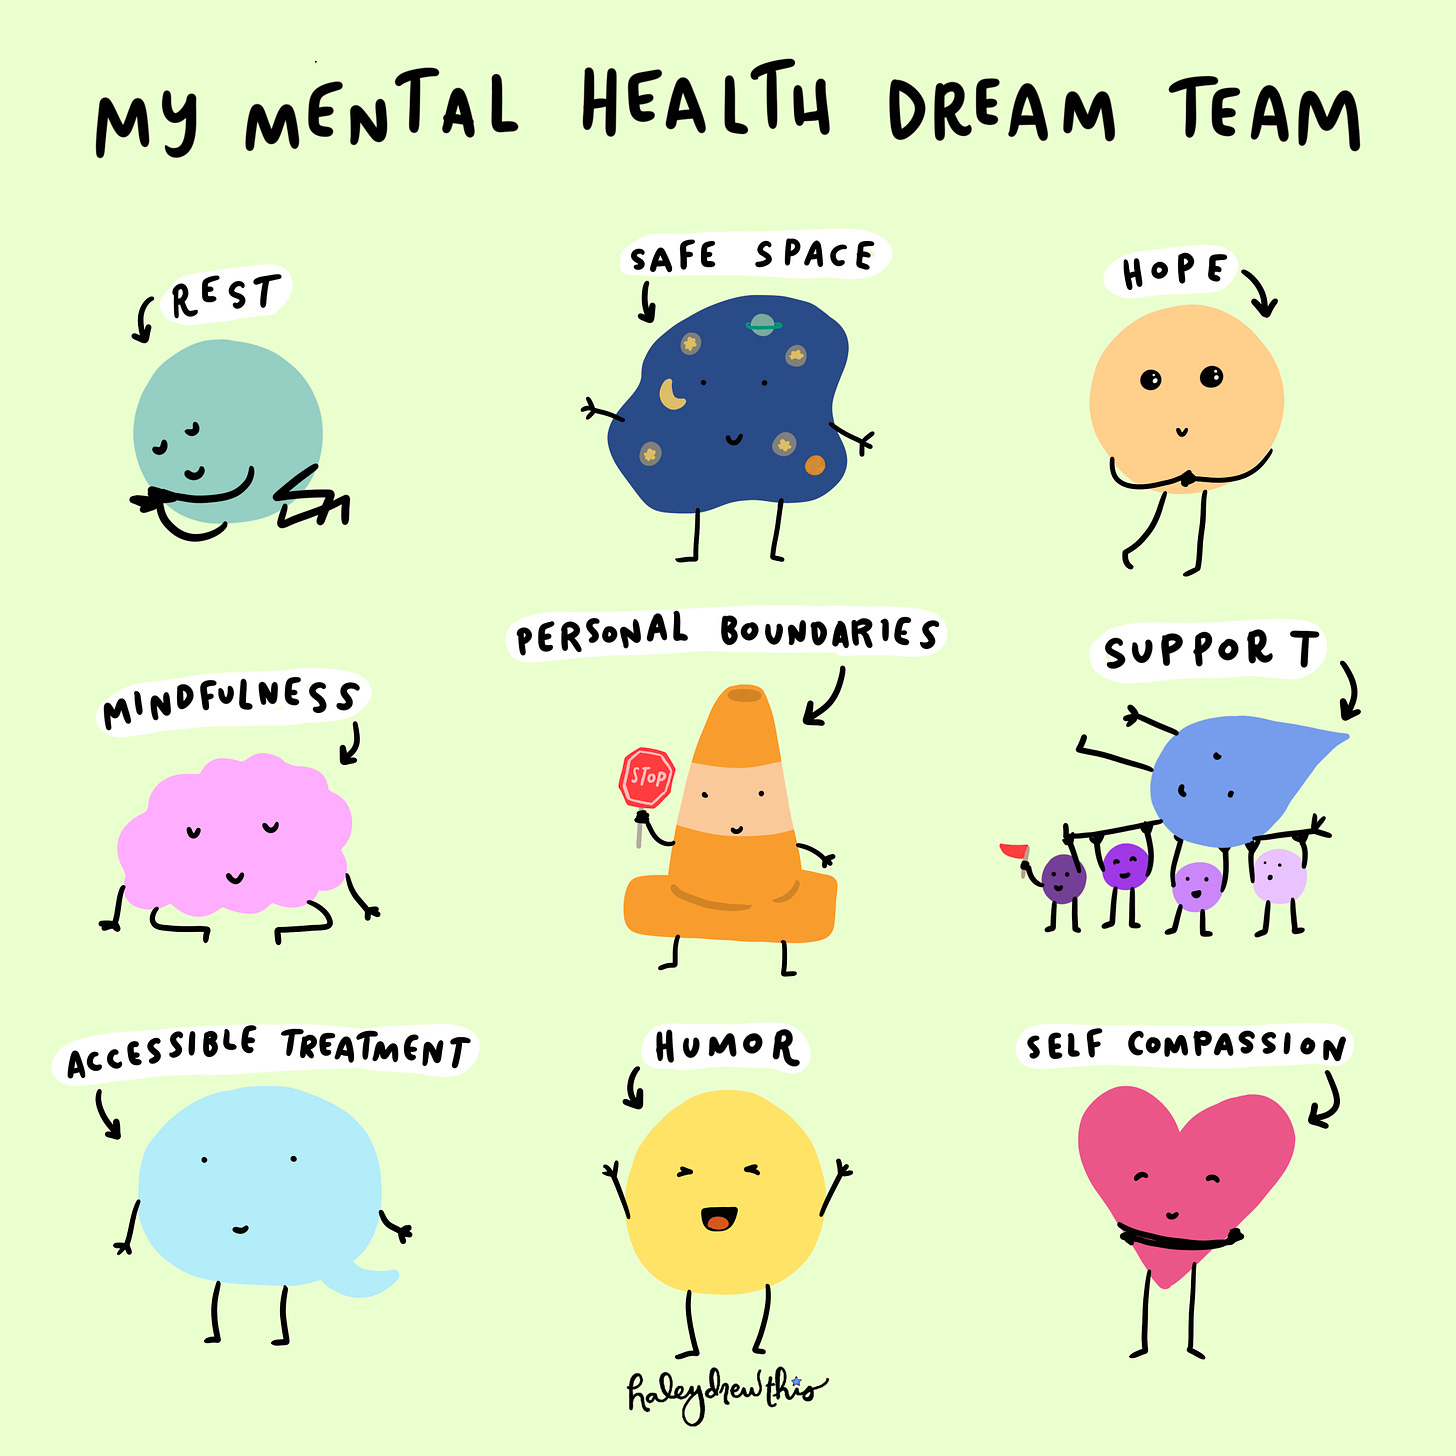 Green background with characters. Reads "My Mental Health Dream Team: Rest, Safe Space, Hope, Mindfulness, personal boundaries, support, accessible treatment, humor, self compassion"